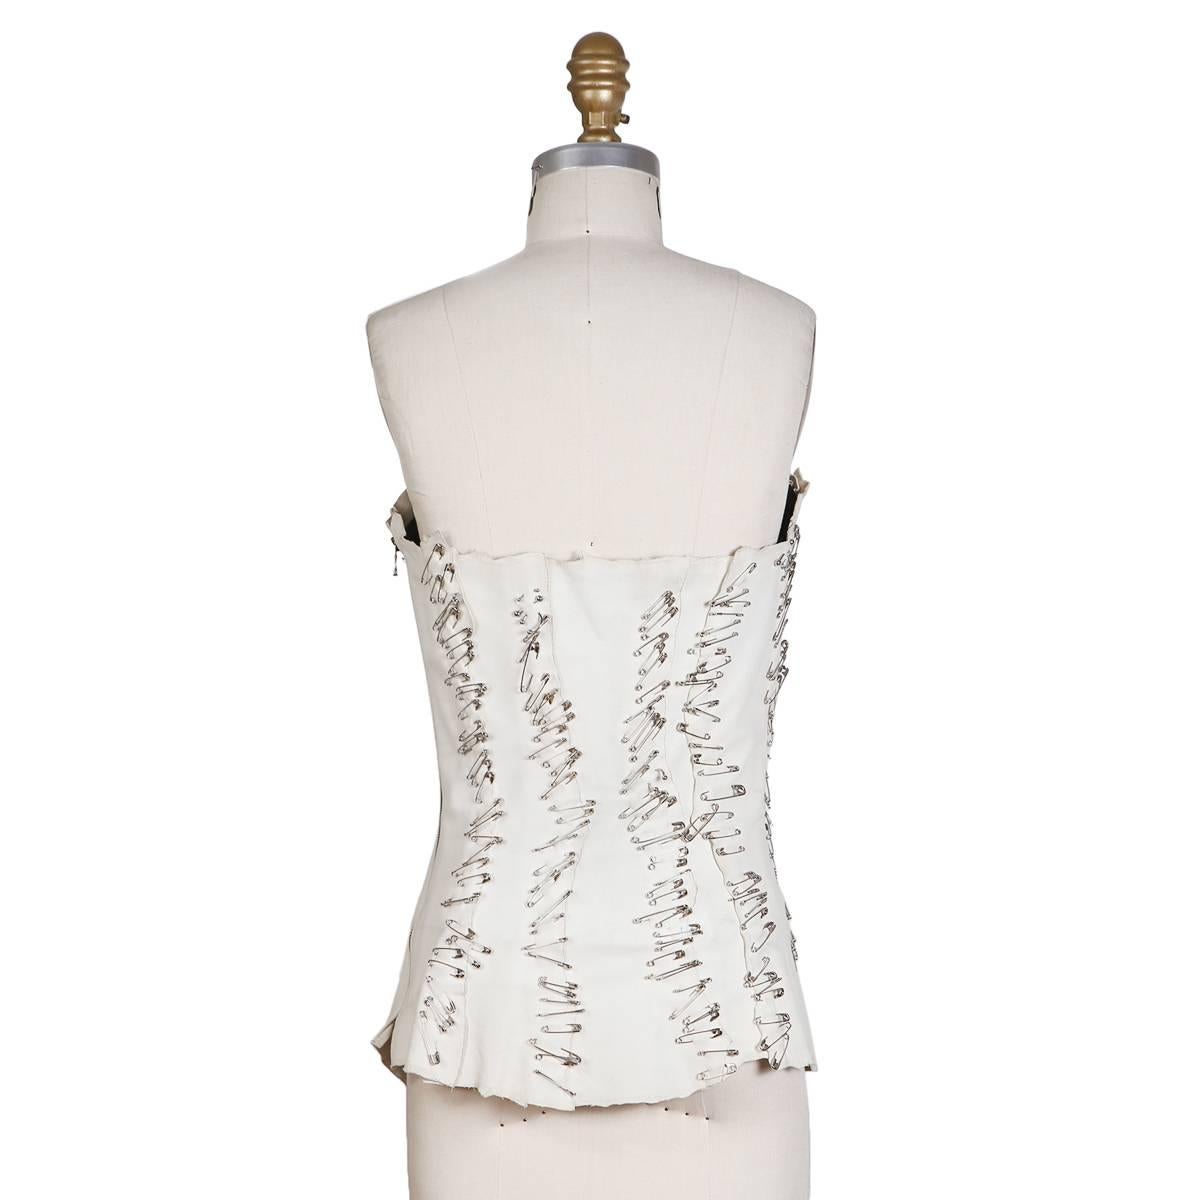 Bustier by Balmain for the S/S 2011-2012 RTW collection
White leather covered in safety pins
Side zipper closure
Condition: Good, with some wear and fading to the white leather

Size/Measurements:
Size 36
32